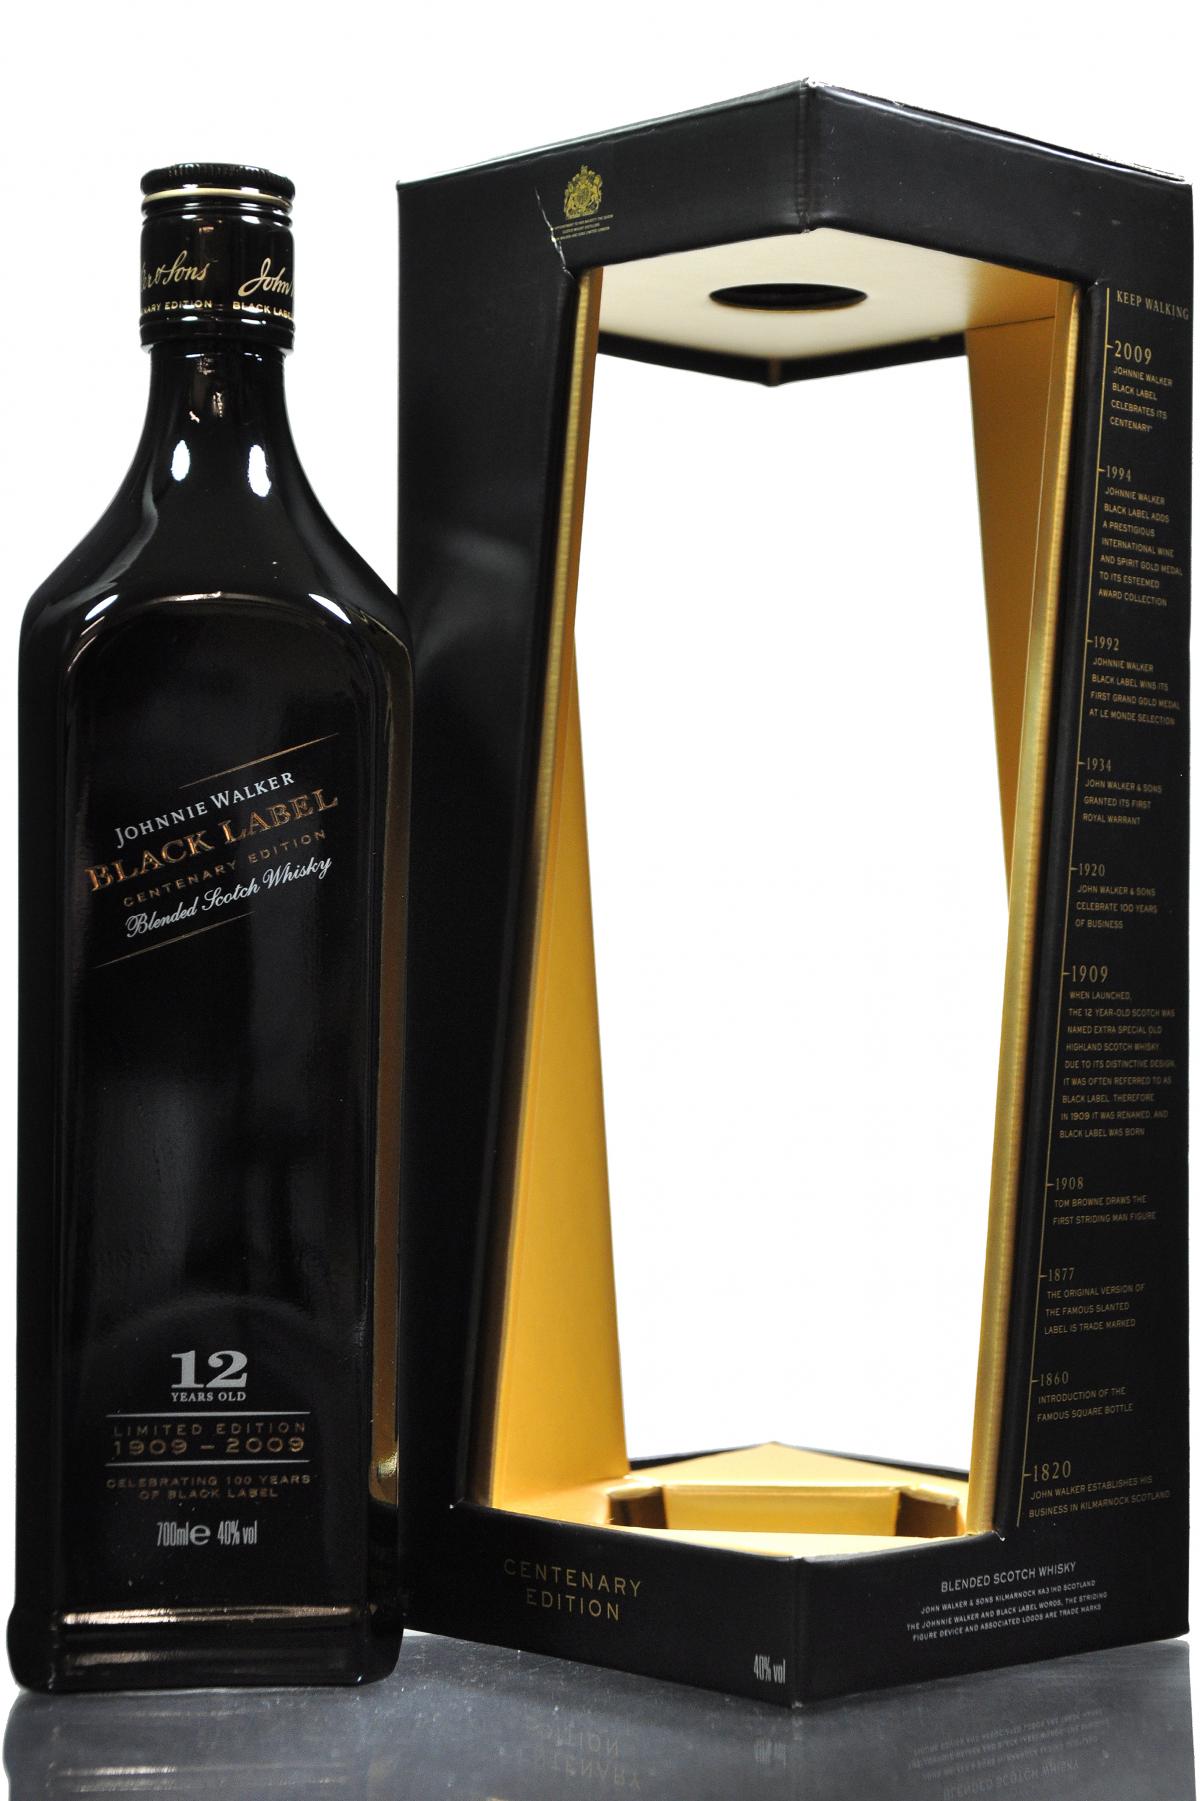 Johnnie Walker 12 Year Old - Black Label - Centenary Of The Striding Man 1909-2009